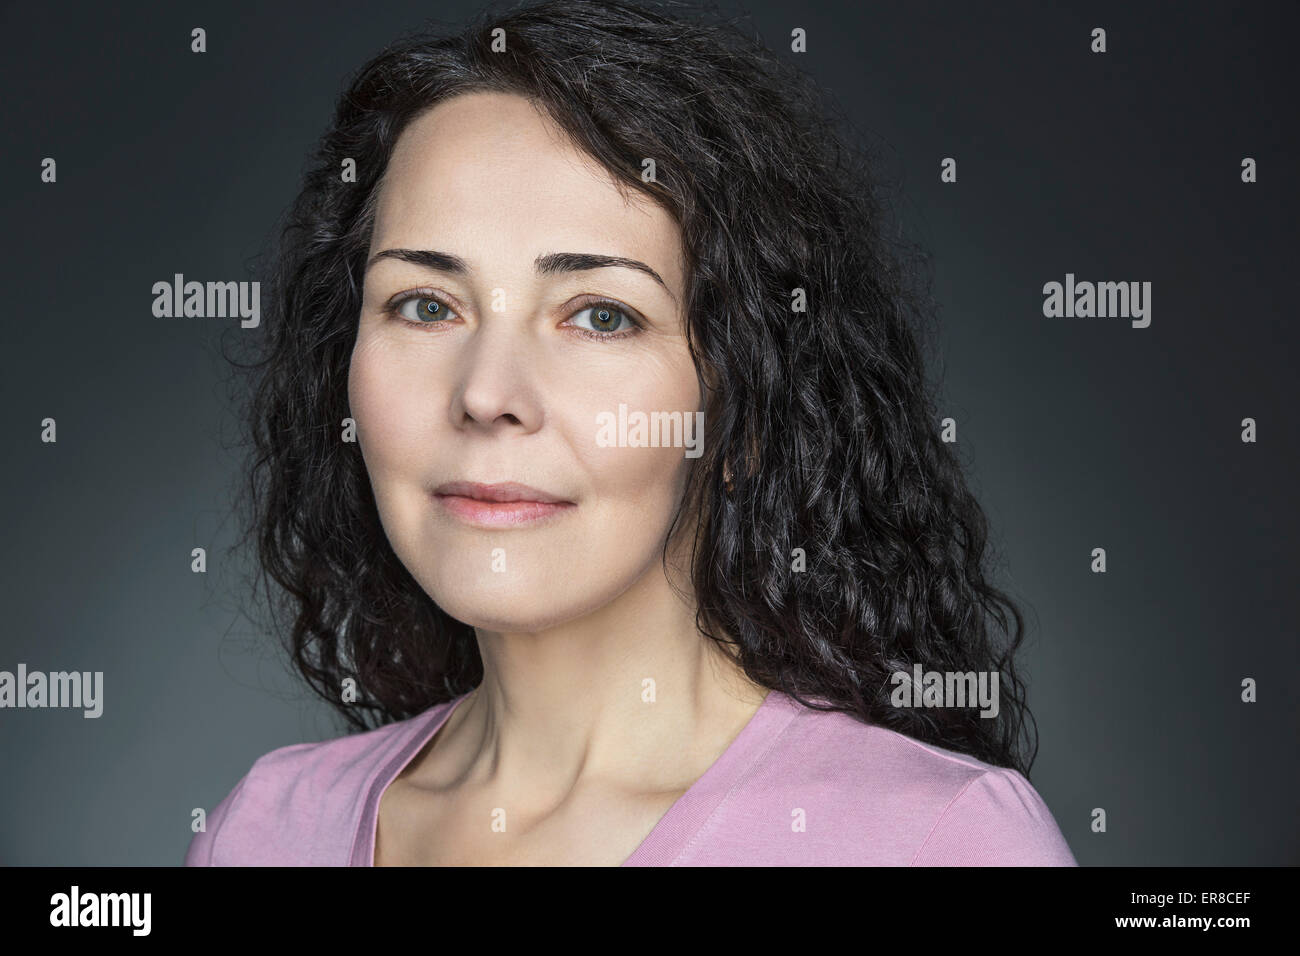 Close-up portrait of confident mature woman over gray background Stock Photo